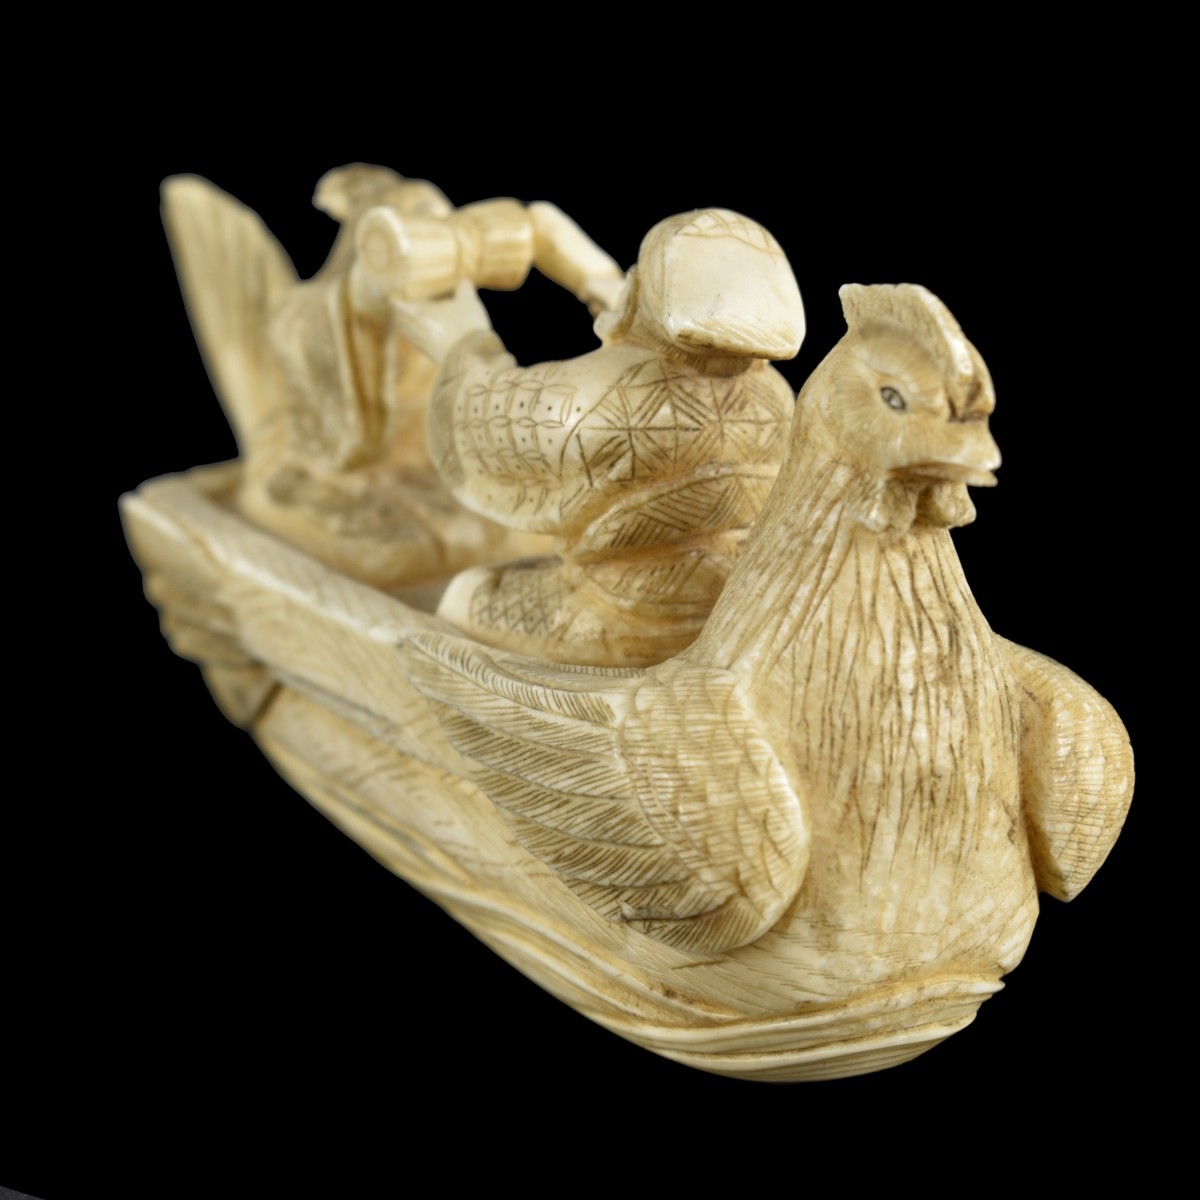 Japanese Carved Boat with Figures